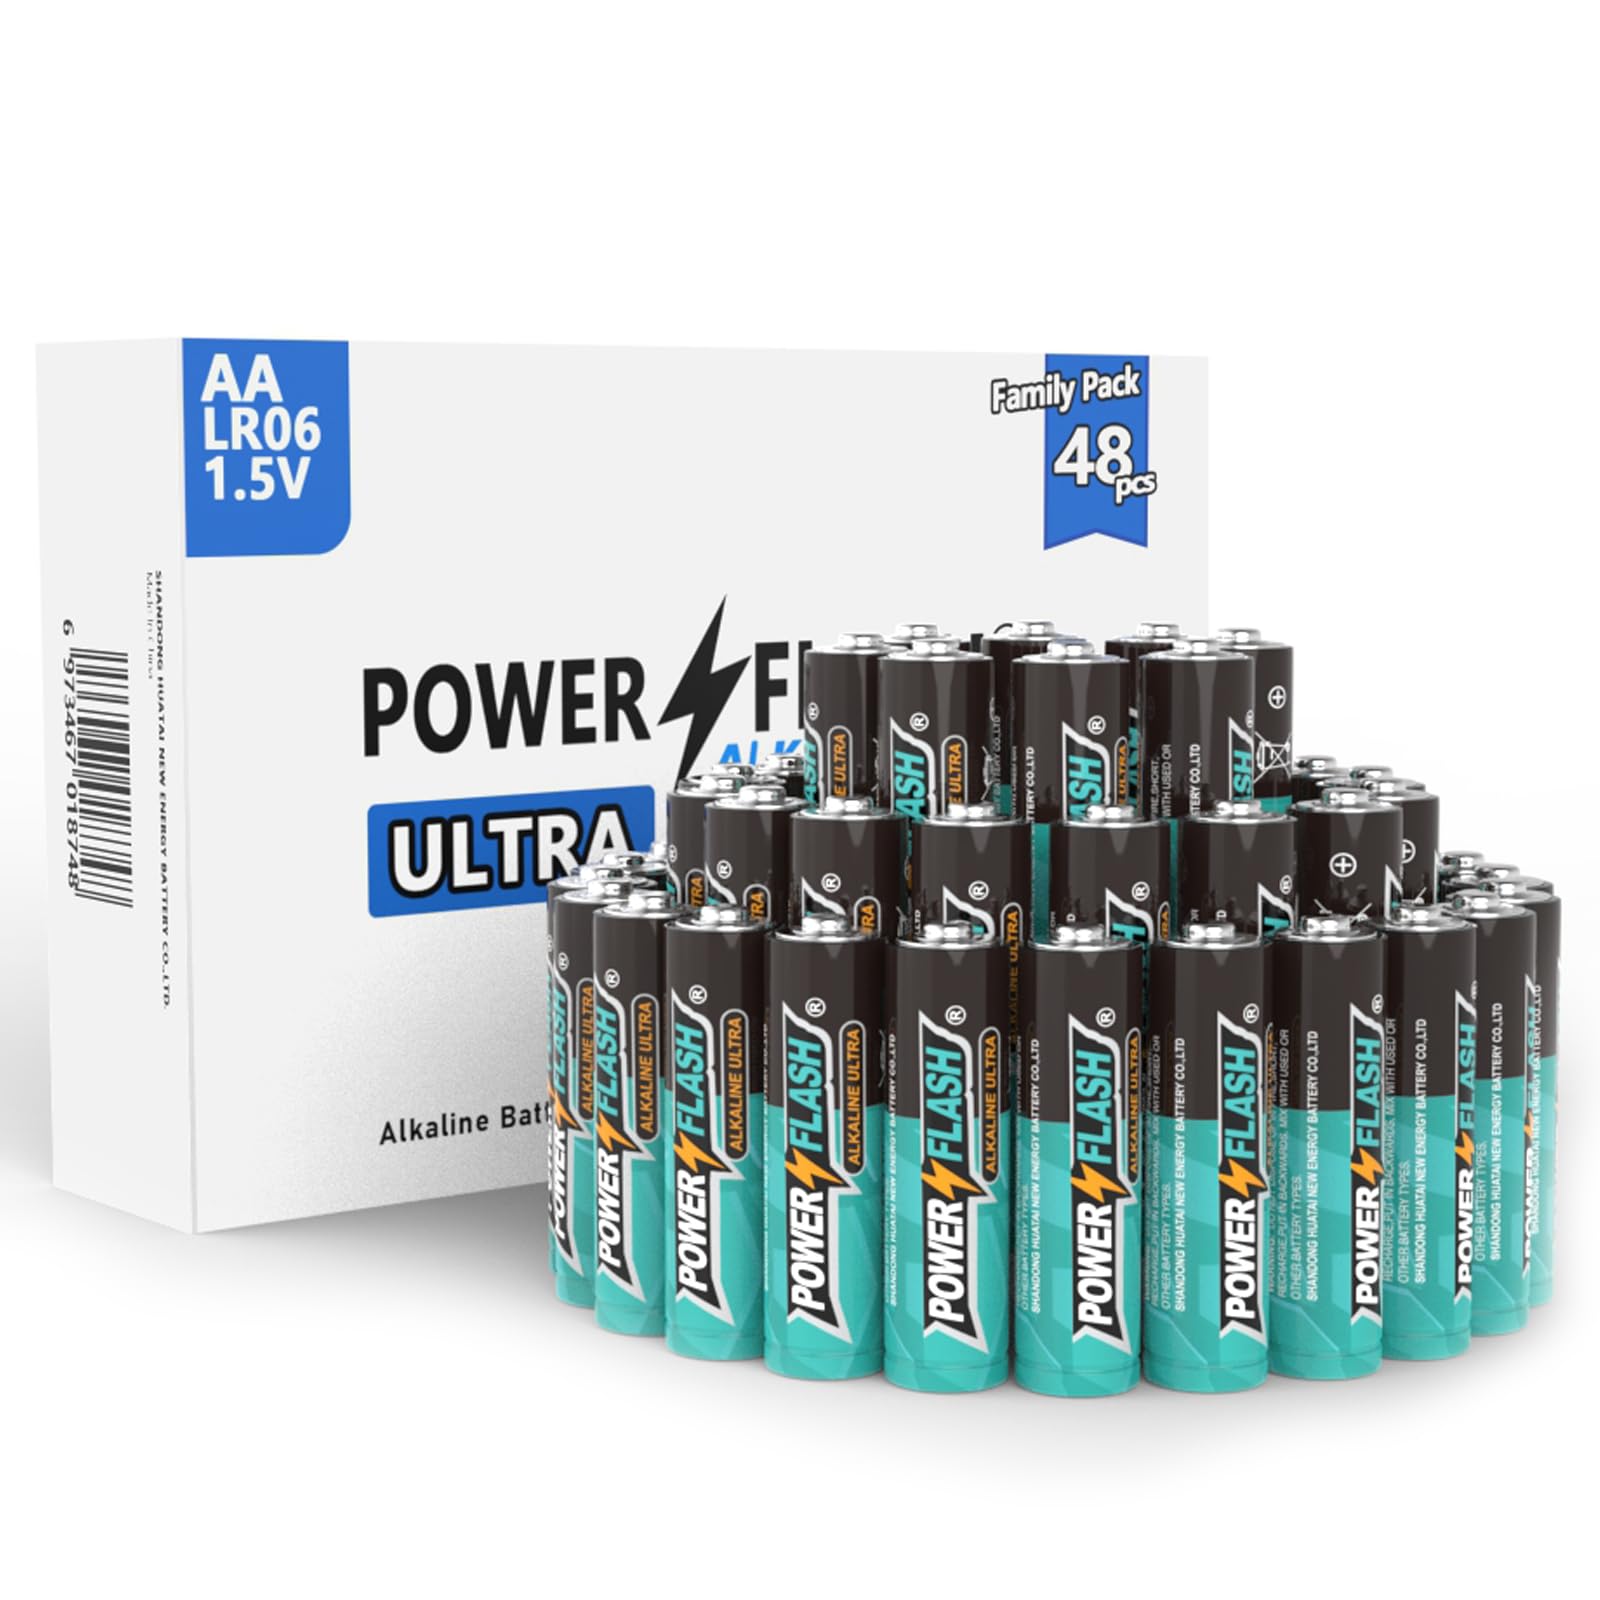 POWER FLASH 48 AA Batteries, Batteries Provide Long Lasting Power, 10 Year Battery Warranty, Alkaline AA Batteries for Home and Office Equipment (48 Count Pack) - $9.99